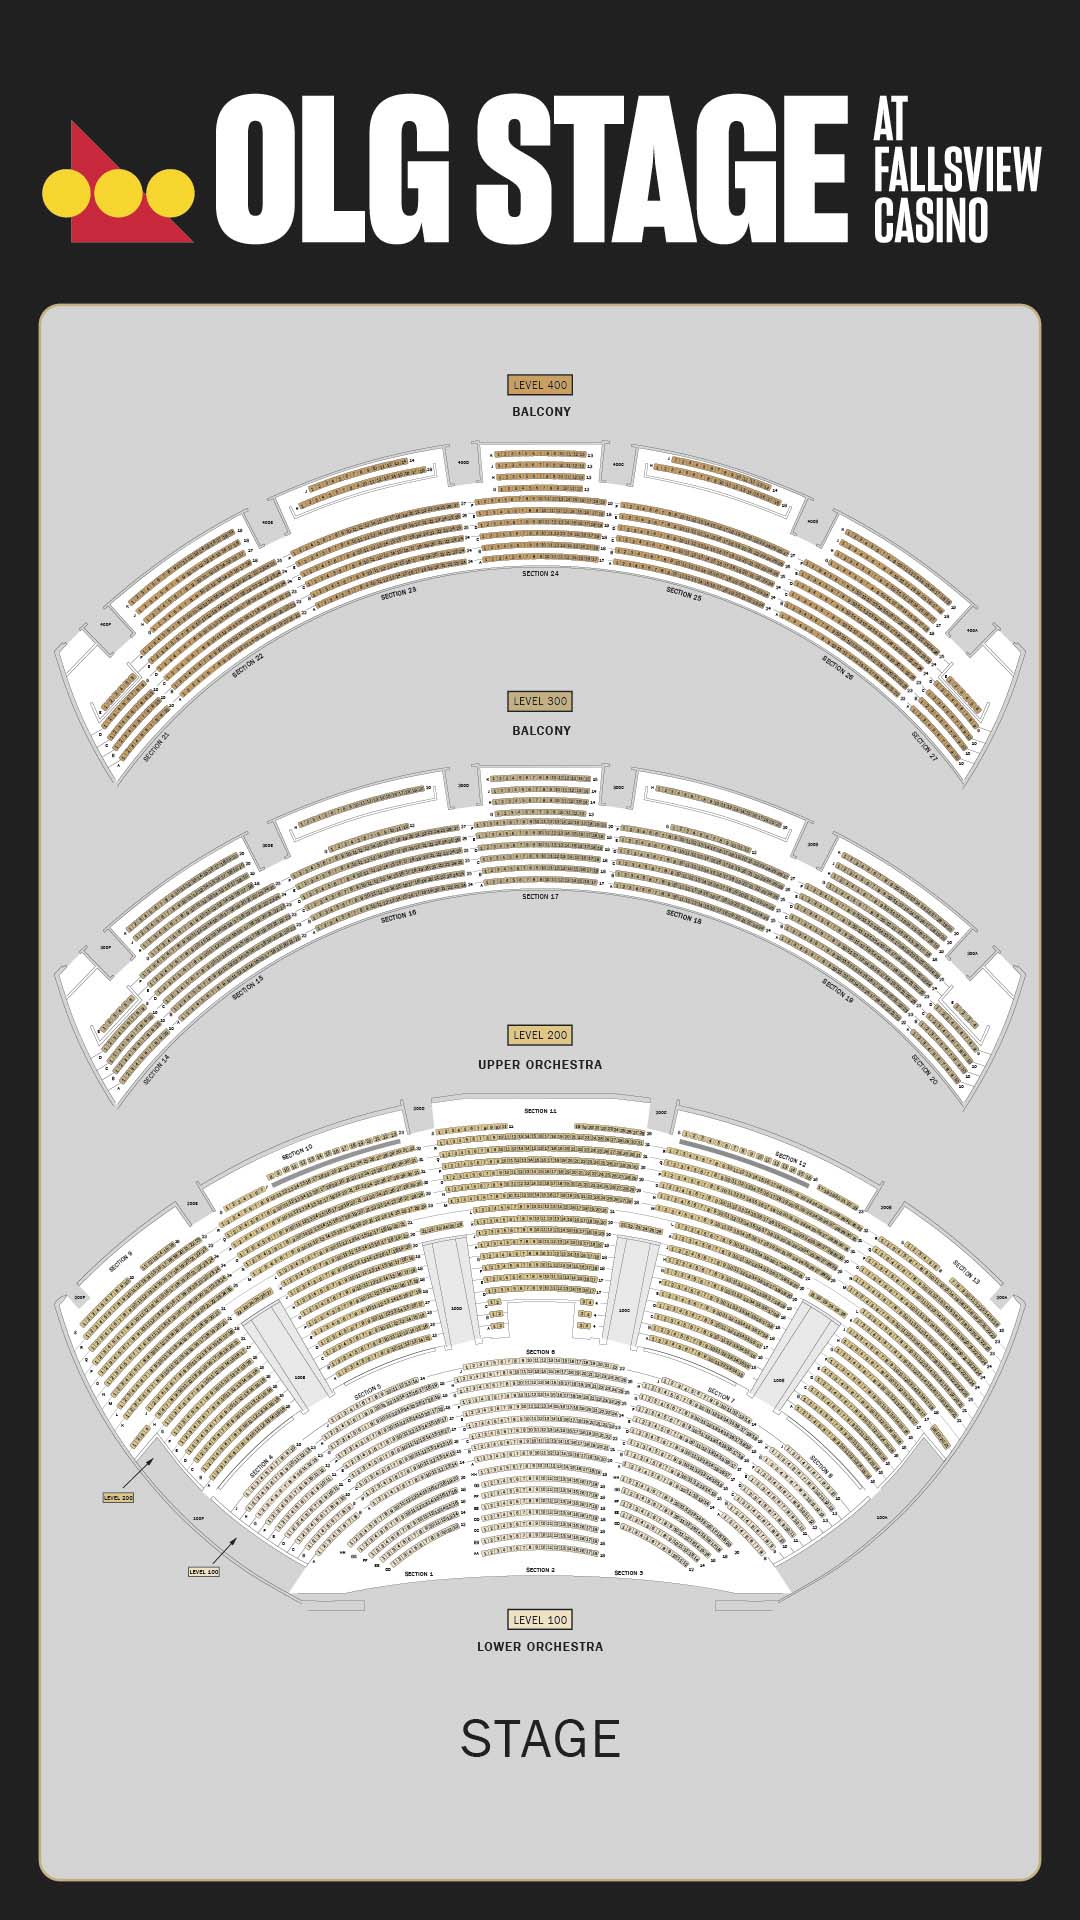 Seating chart of OLG Stage at Fallsview Casino theatre